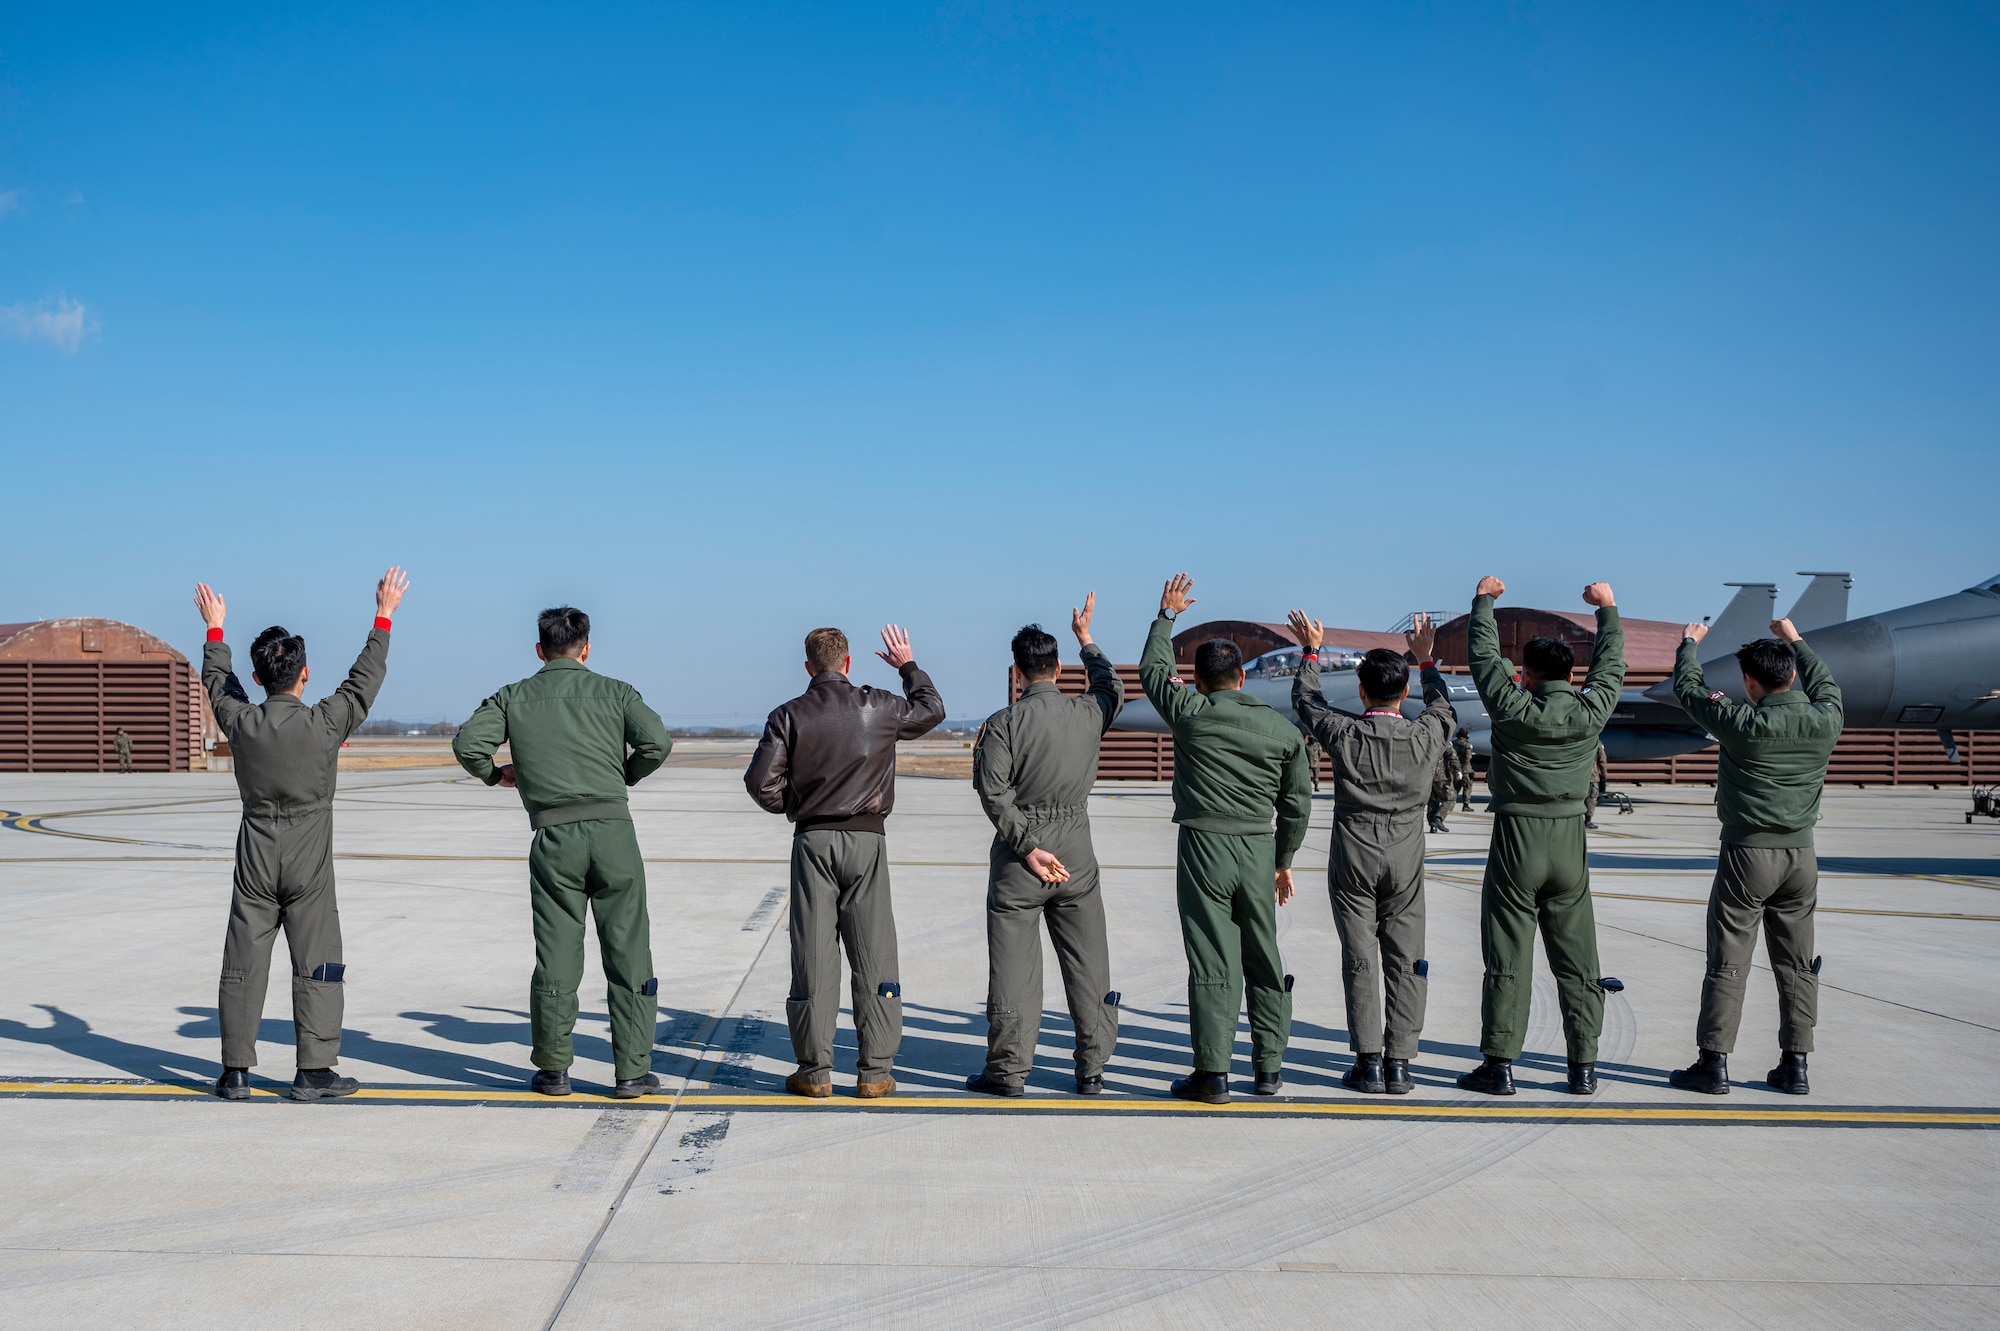 Service members from the U.S. Air Force and the Republic of Korea Air Force wave to ROKAF pilots as they depart after Buddy Squadron 24-2 at Osan Air Base, Republic of Korea, March 8, 2024. The Buddy Squadron Program allows for bilateral unification, giving more opportunity to train together and ensure lethality and readiness of pilots. The Buddy Squadron Program fosters objective-based training and improves interoperability between the U.S. and ROKAF fighter squadrons. (U.S. Air Force photo by Senior Airman Kaitlin Frazier)